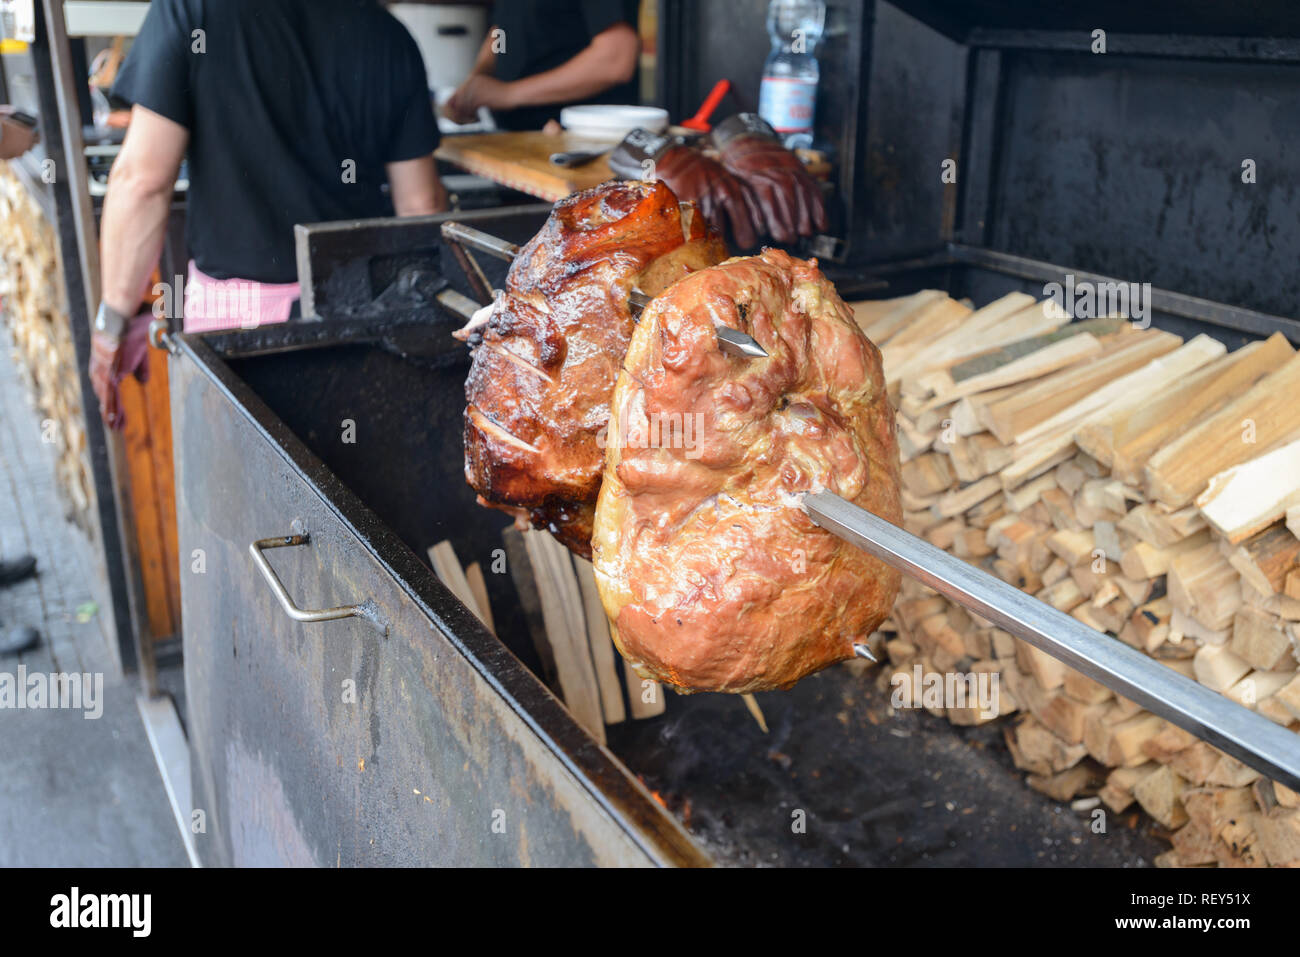 Prague Ham is traditionally served in restaurants and from street vendors with a side of boiled potatoes  and often accompanied by Czech beer. Stock Photo